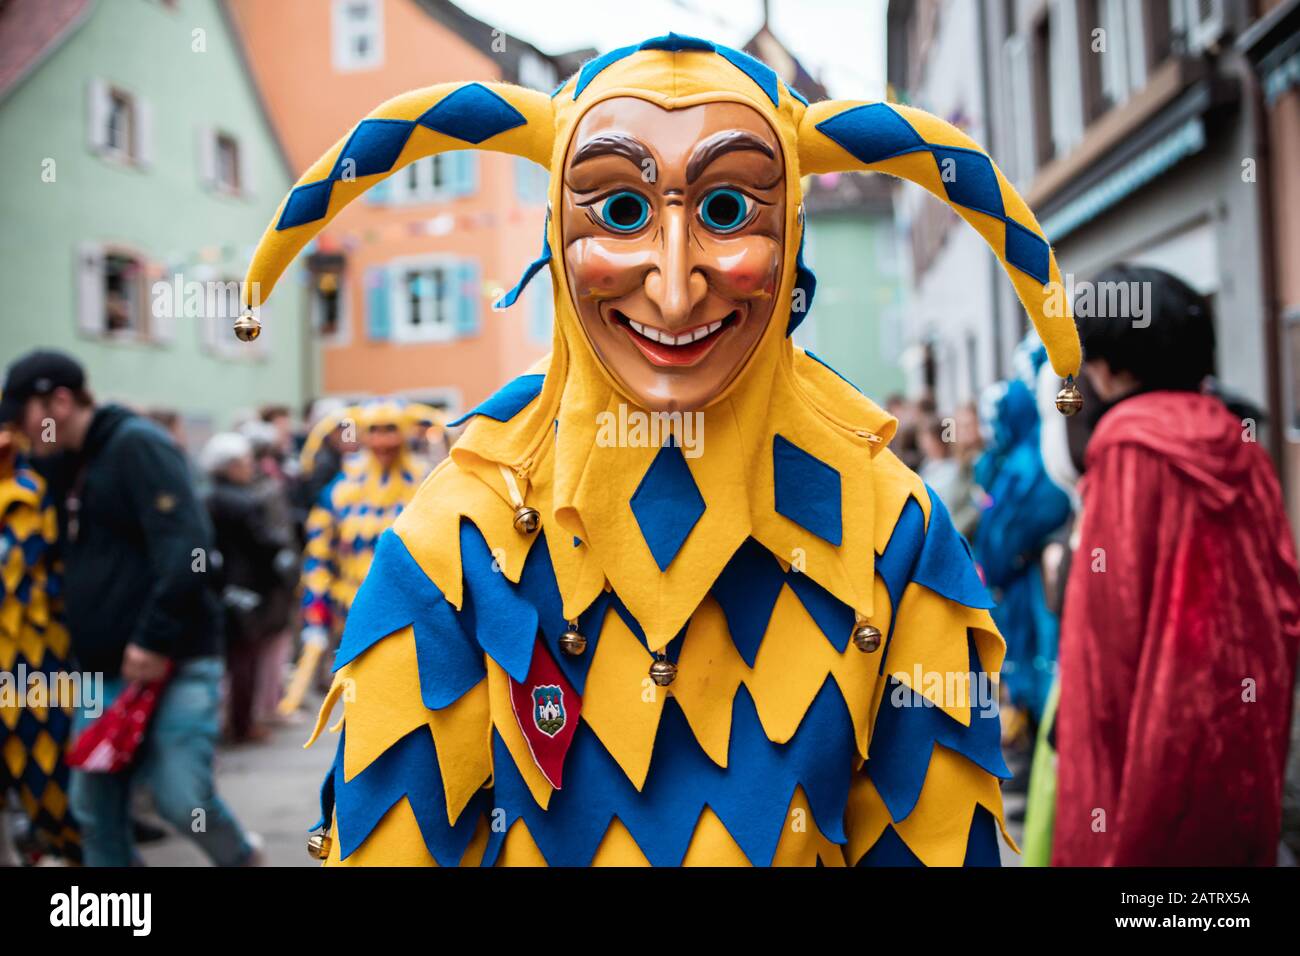 Bajass from Waldkirch - beautiful fool figure in a yellow-blue robe with a curious expression on the carnival parade in Staufen, southern Germany Stock Photo